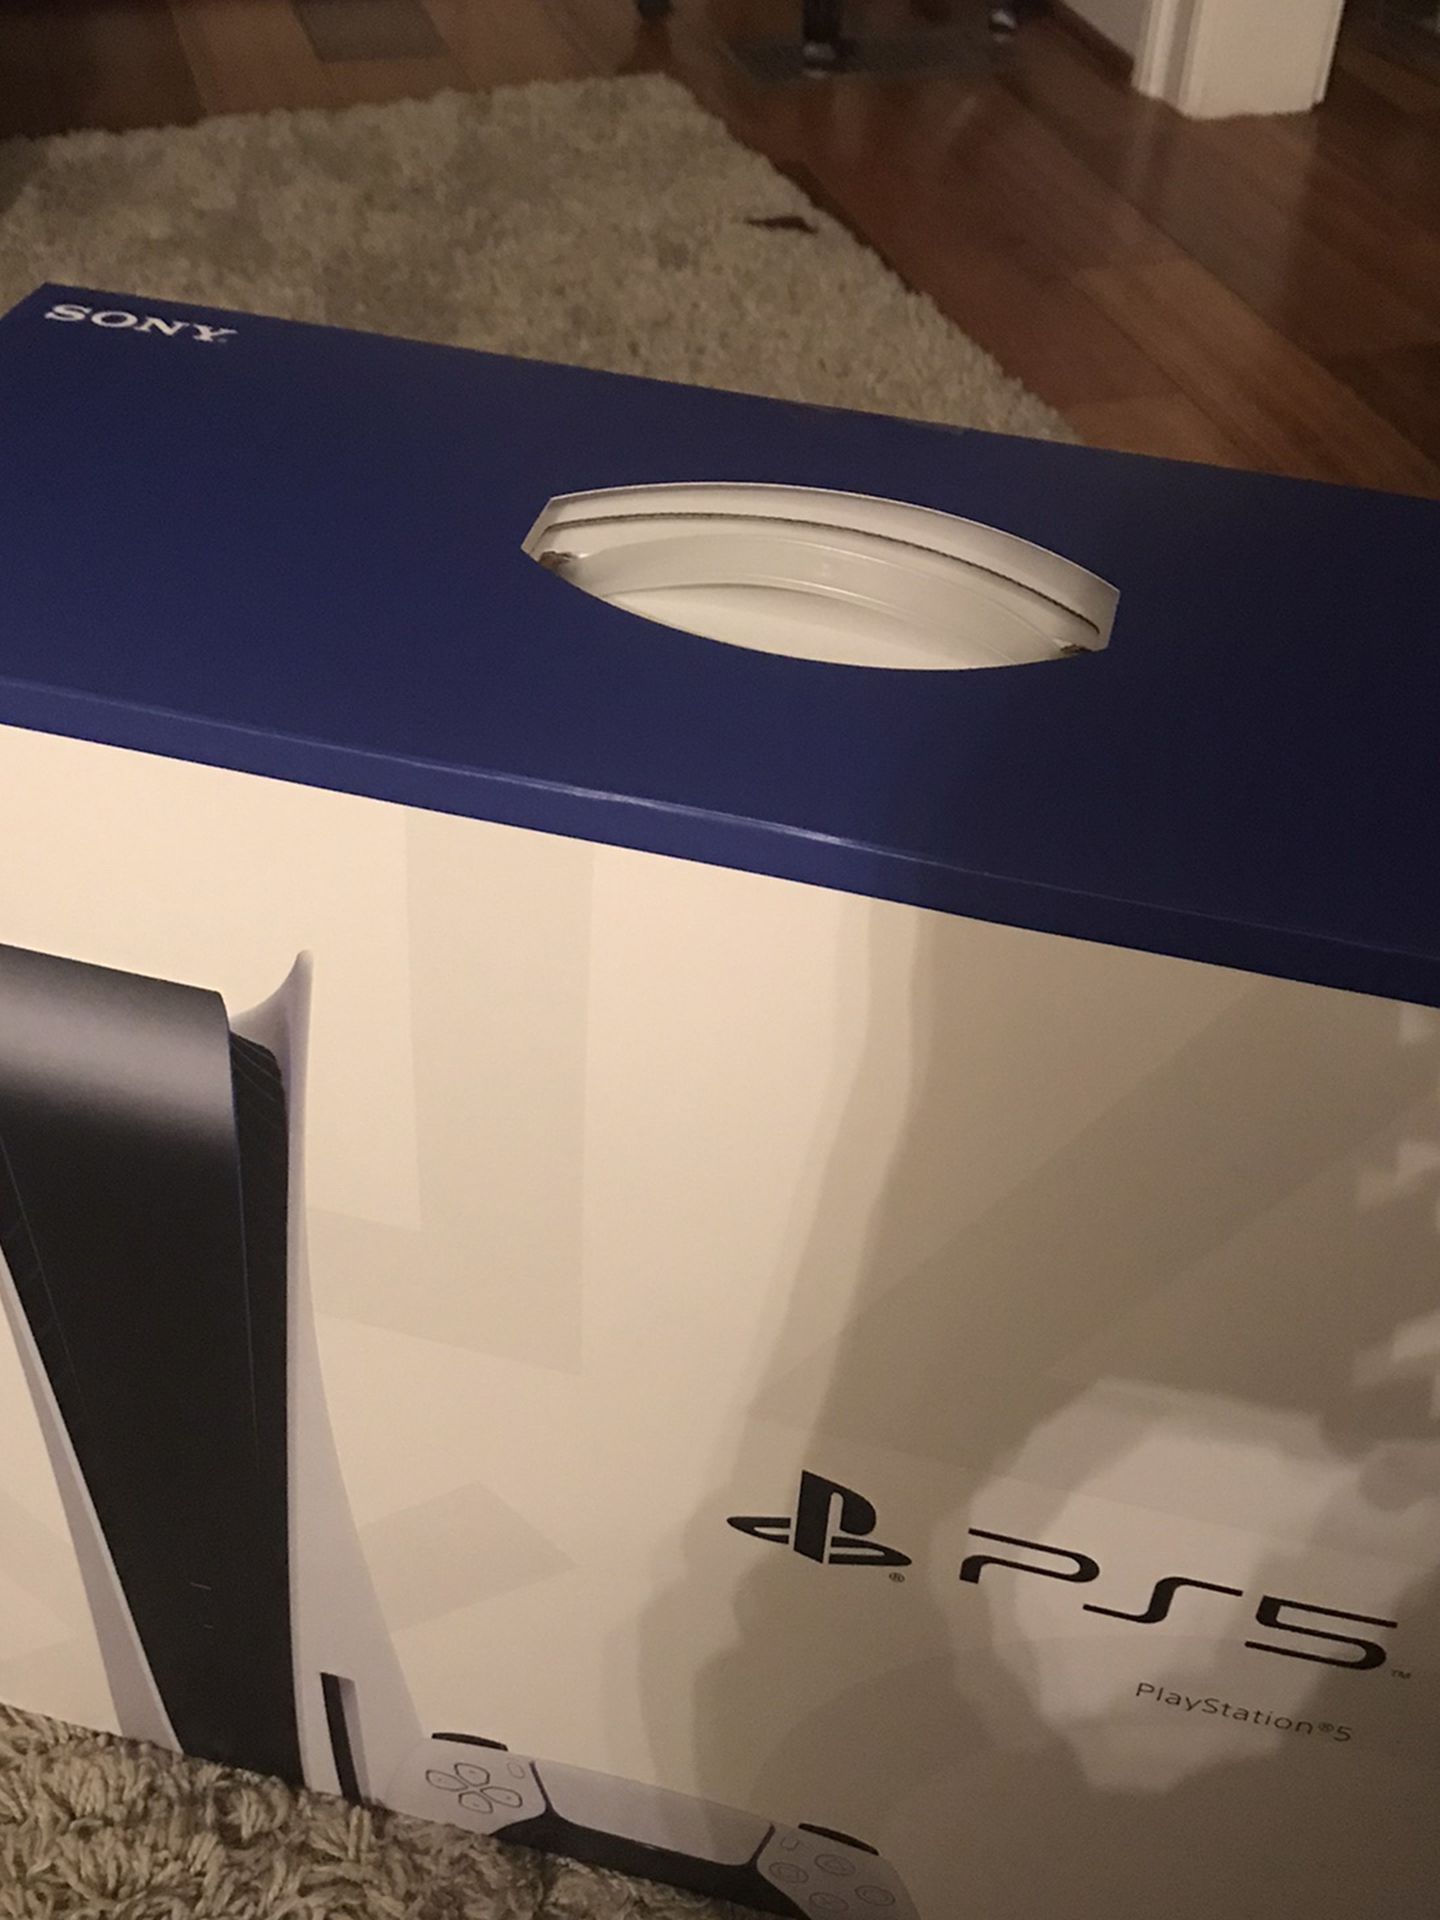 PlayStation 5 Standard Edition Need Gone ASAP